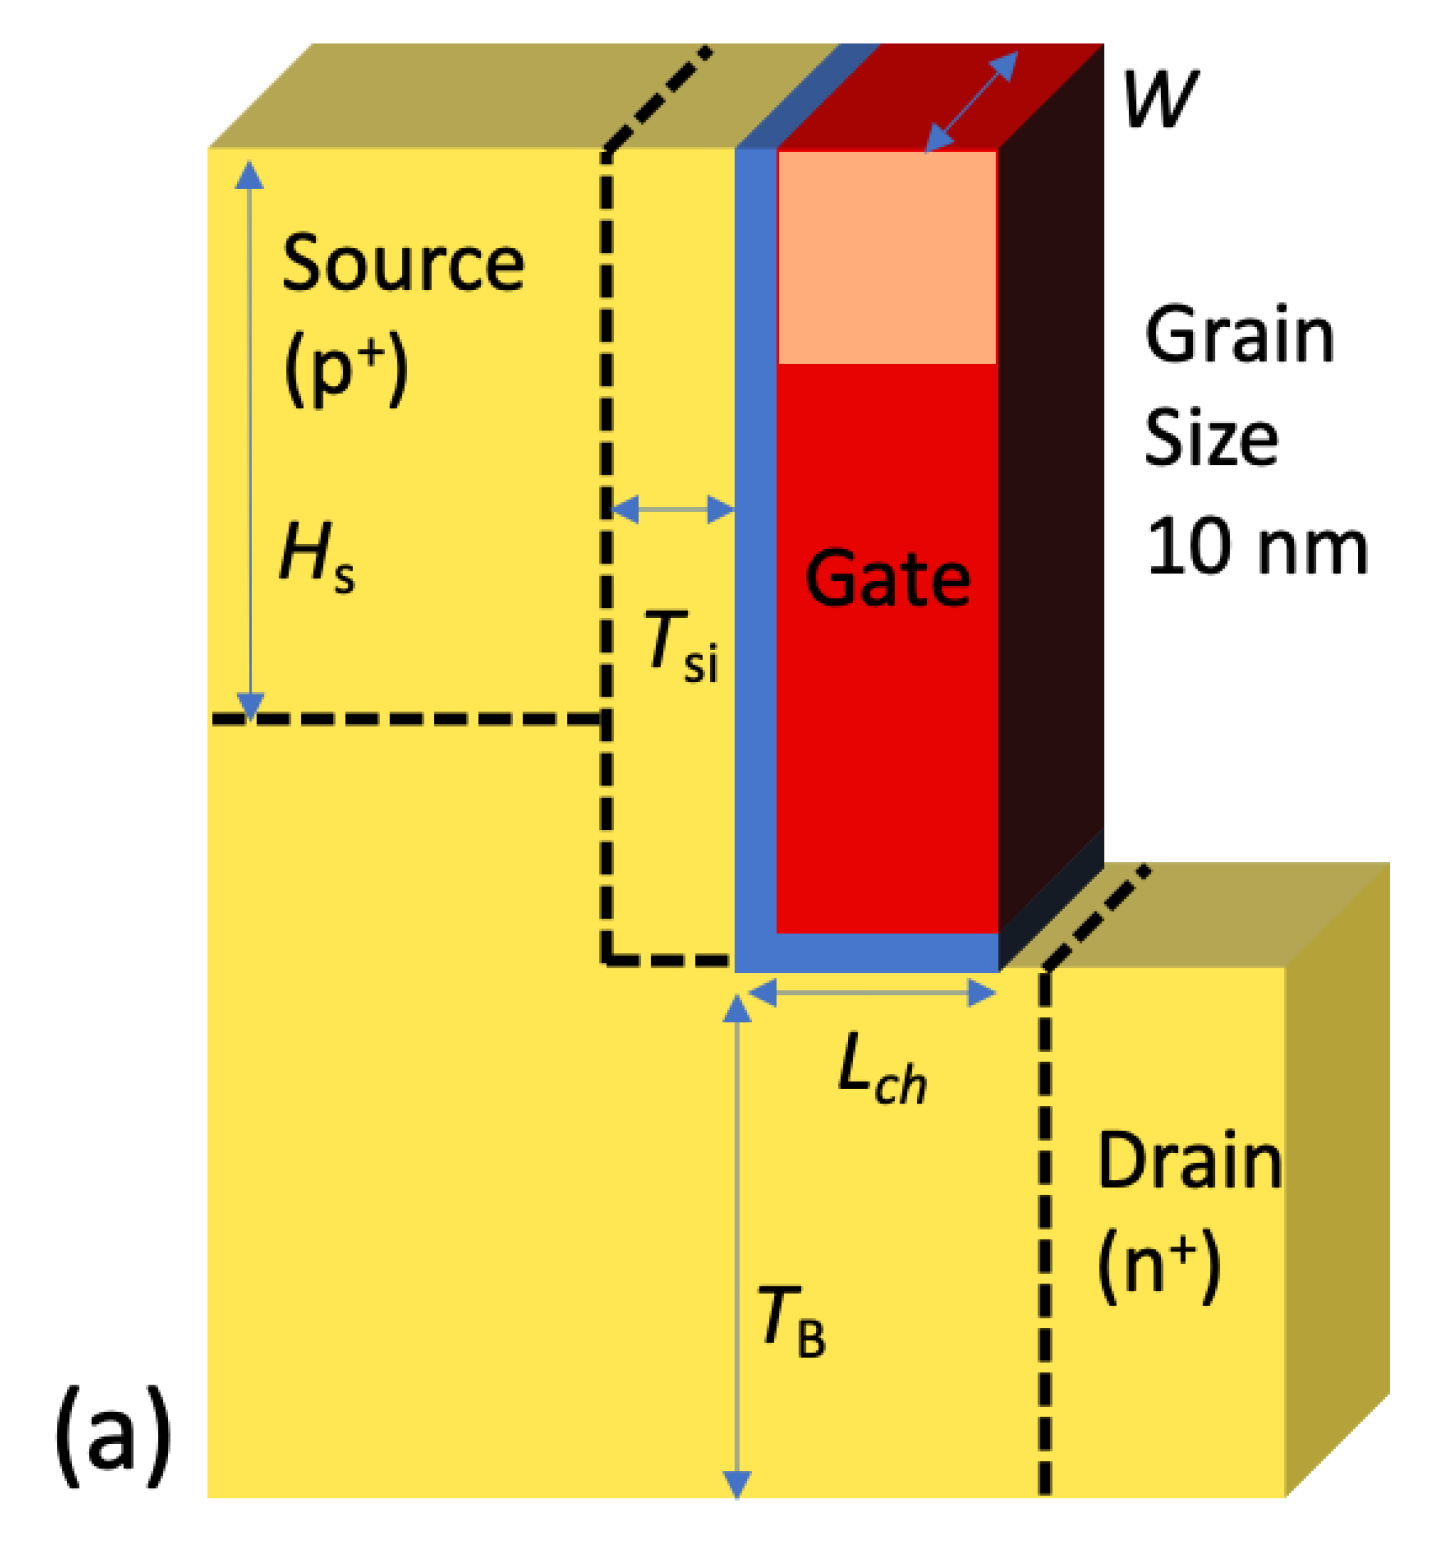 Mean dynamic current versus a) Transistor Width and b) Gate Length